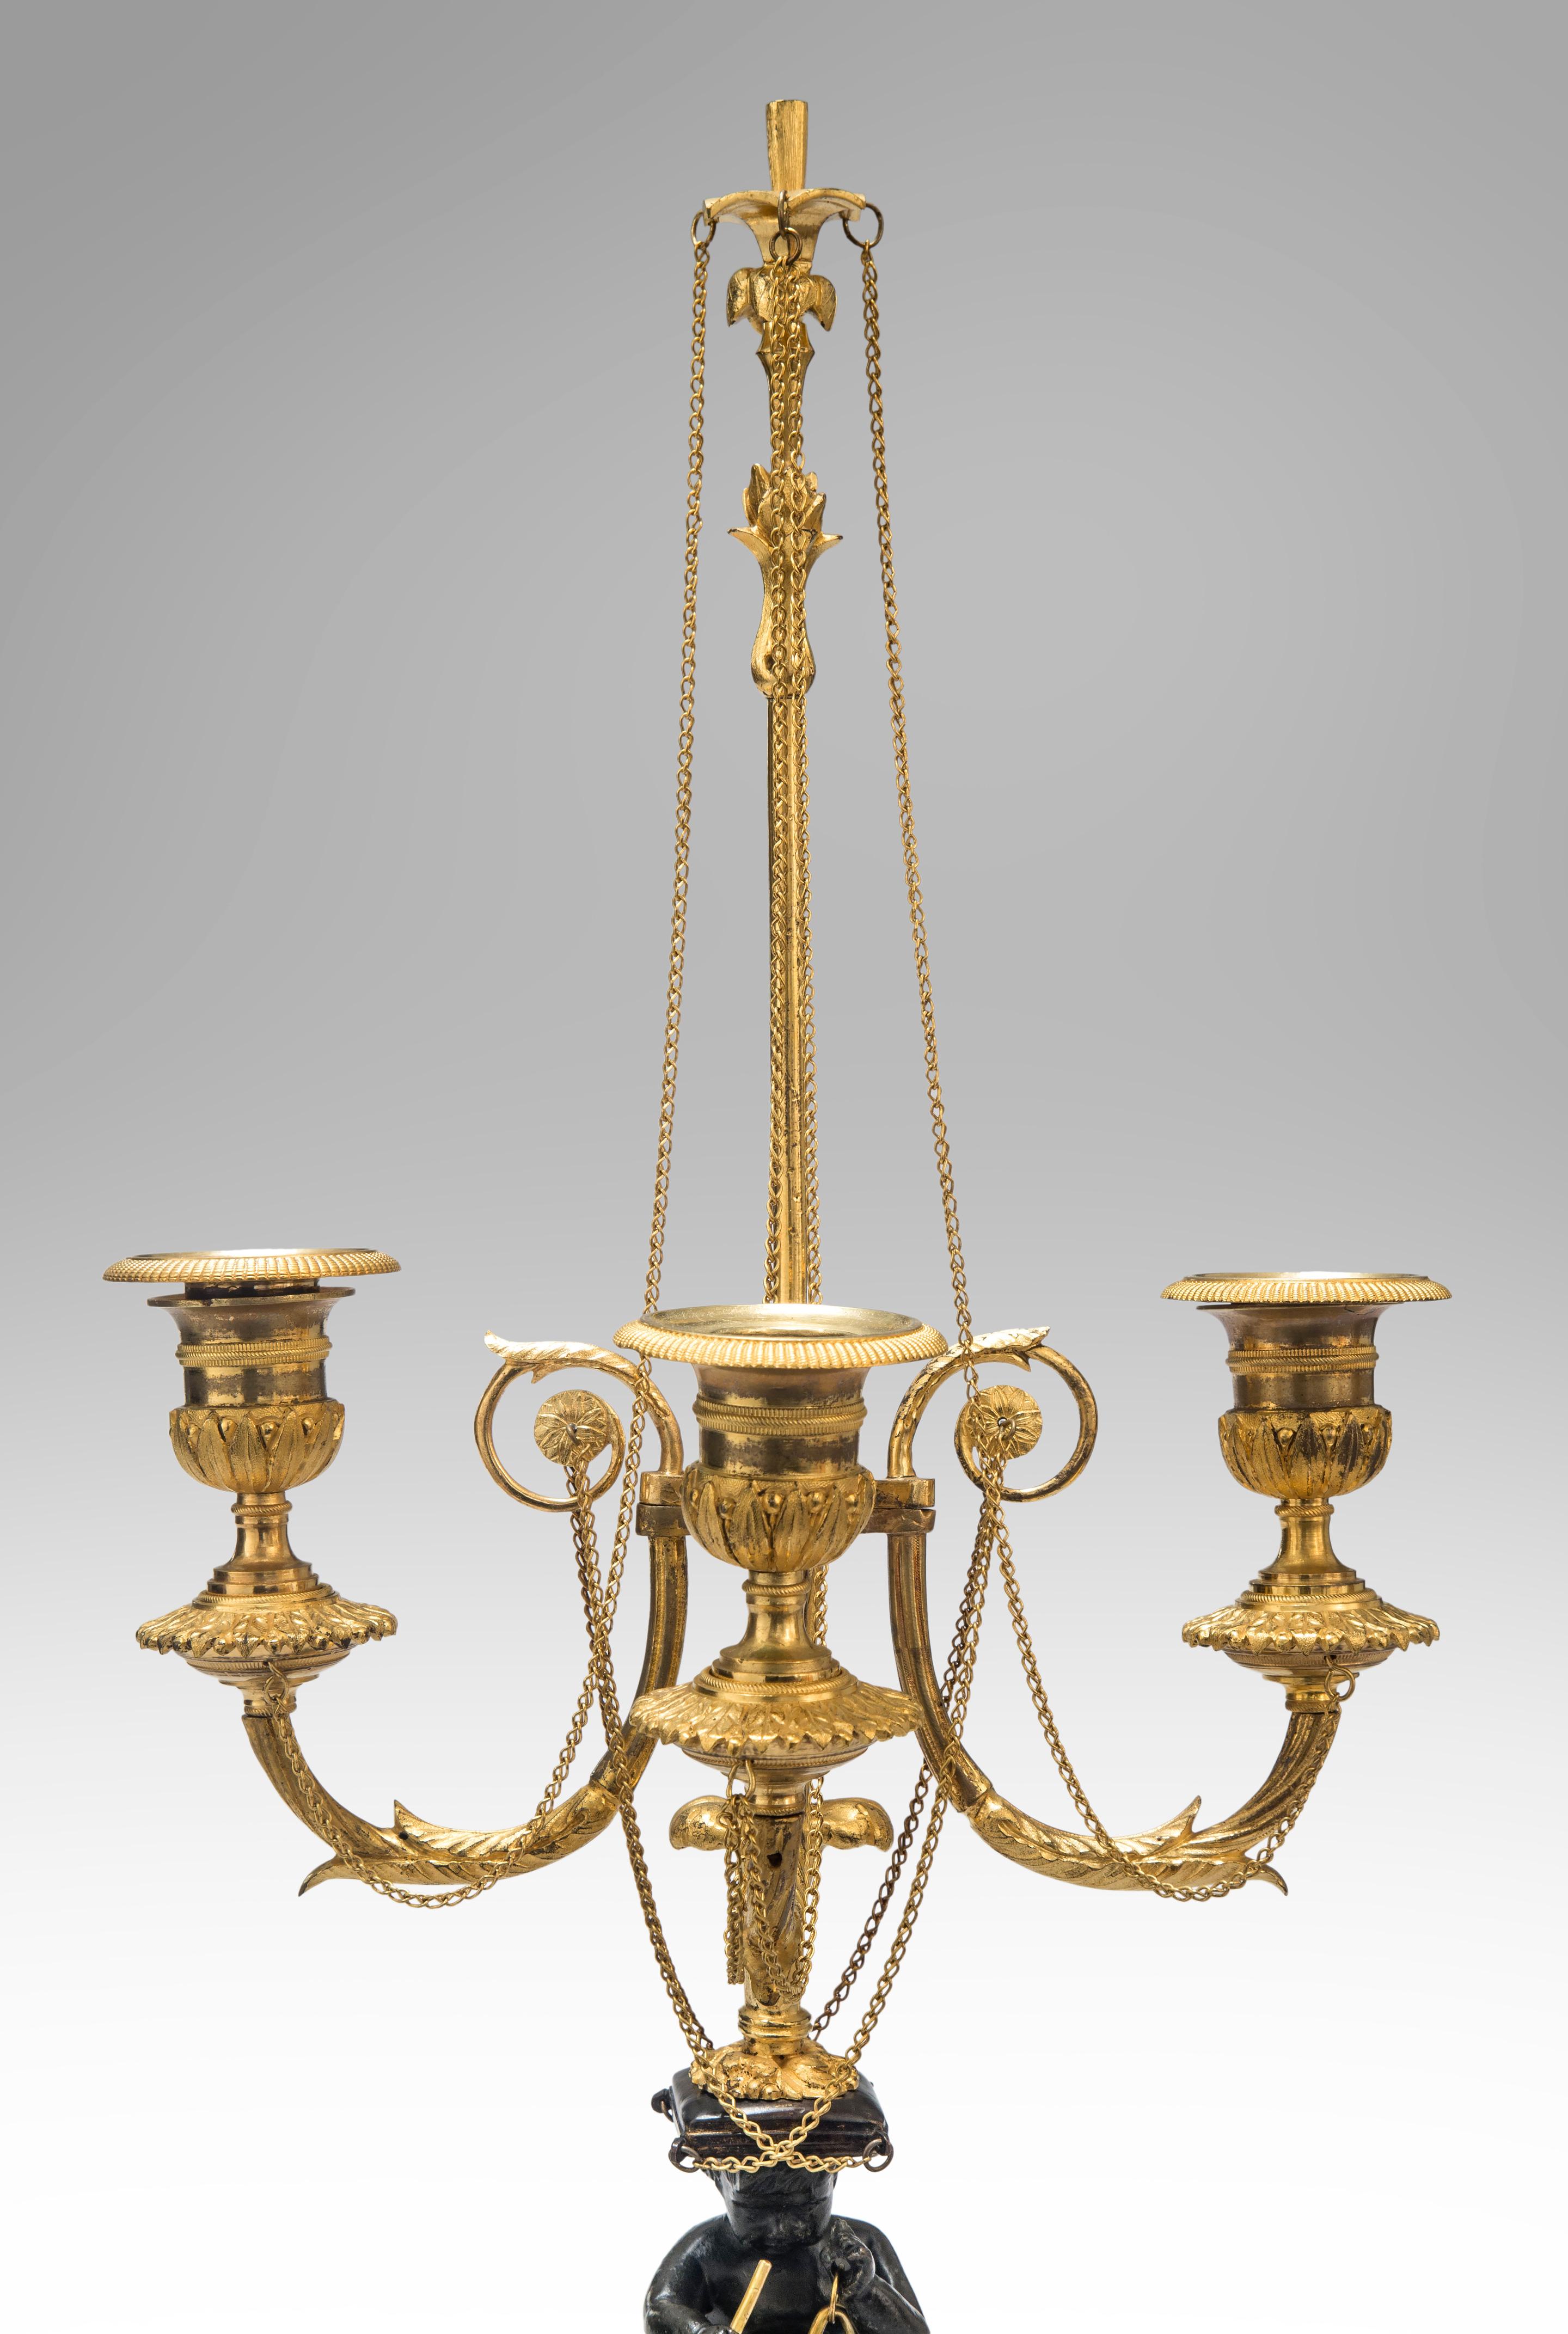 A pair of Louis XVI candelabra
Late 18th century
An extraordinary pair of the finest quality candelabra, crisply detailed, and with lovely gilding of a restrained yet sumptuous color. Each with a patinated bronze putto triton seated on a sleigh